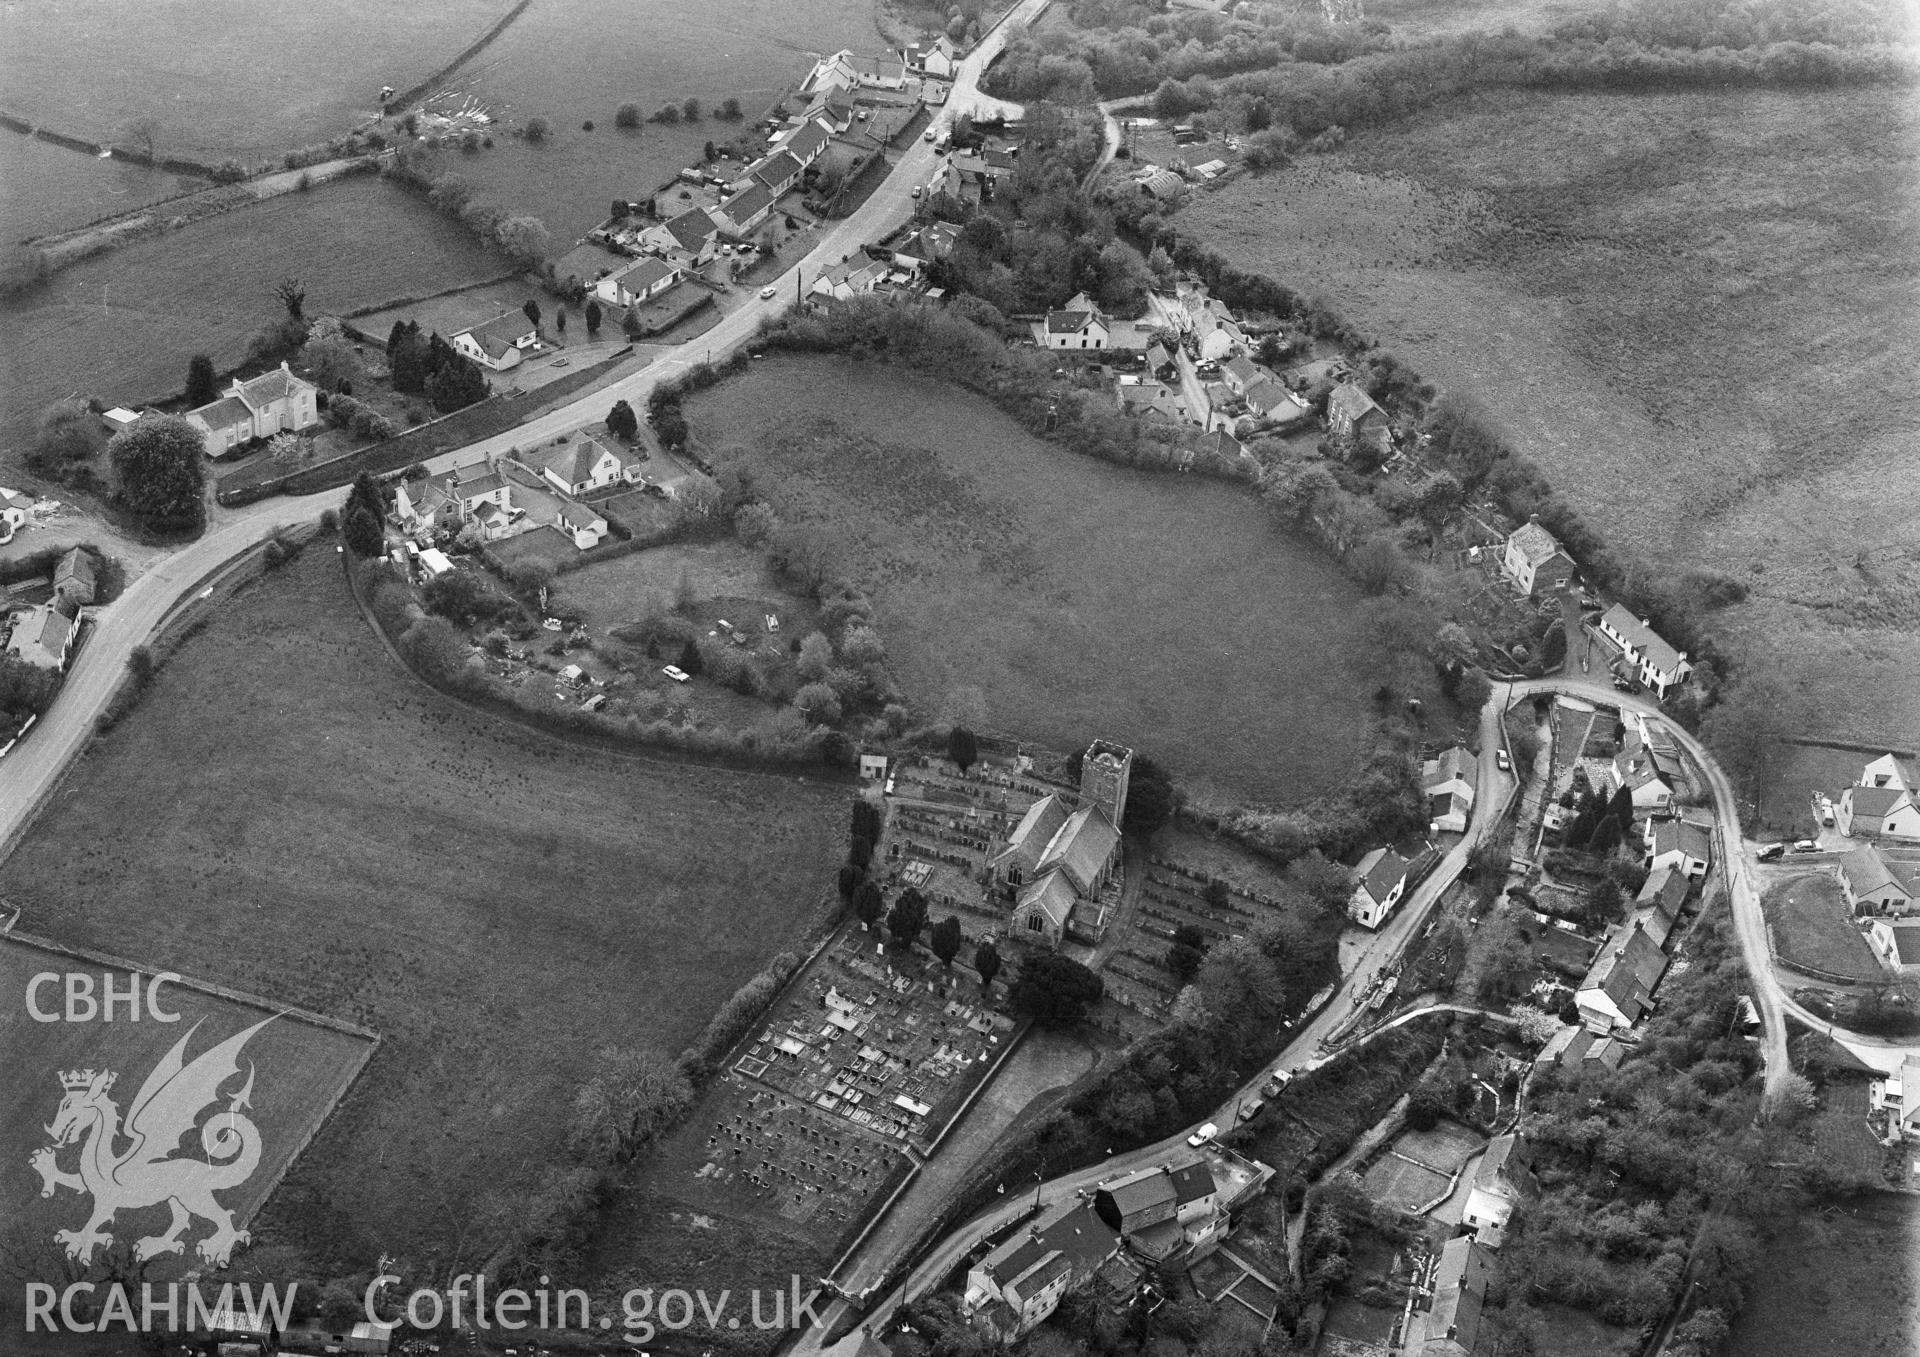 RCAHMW Black and white oblique aerial photograph of St Llawddog's Church, Cilgerran, taken on 27/04/1999 by Toby Driver